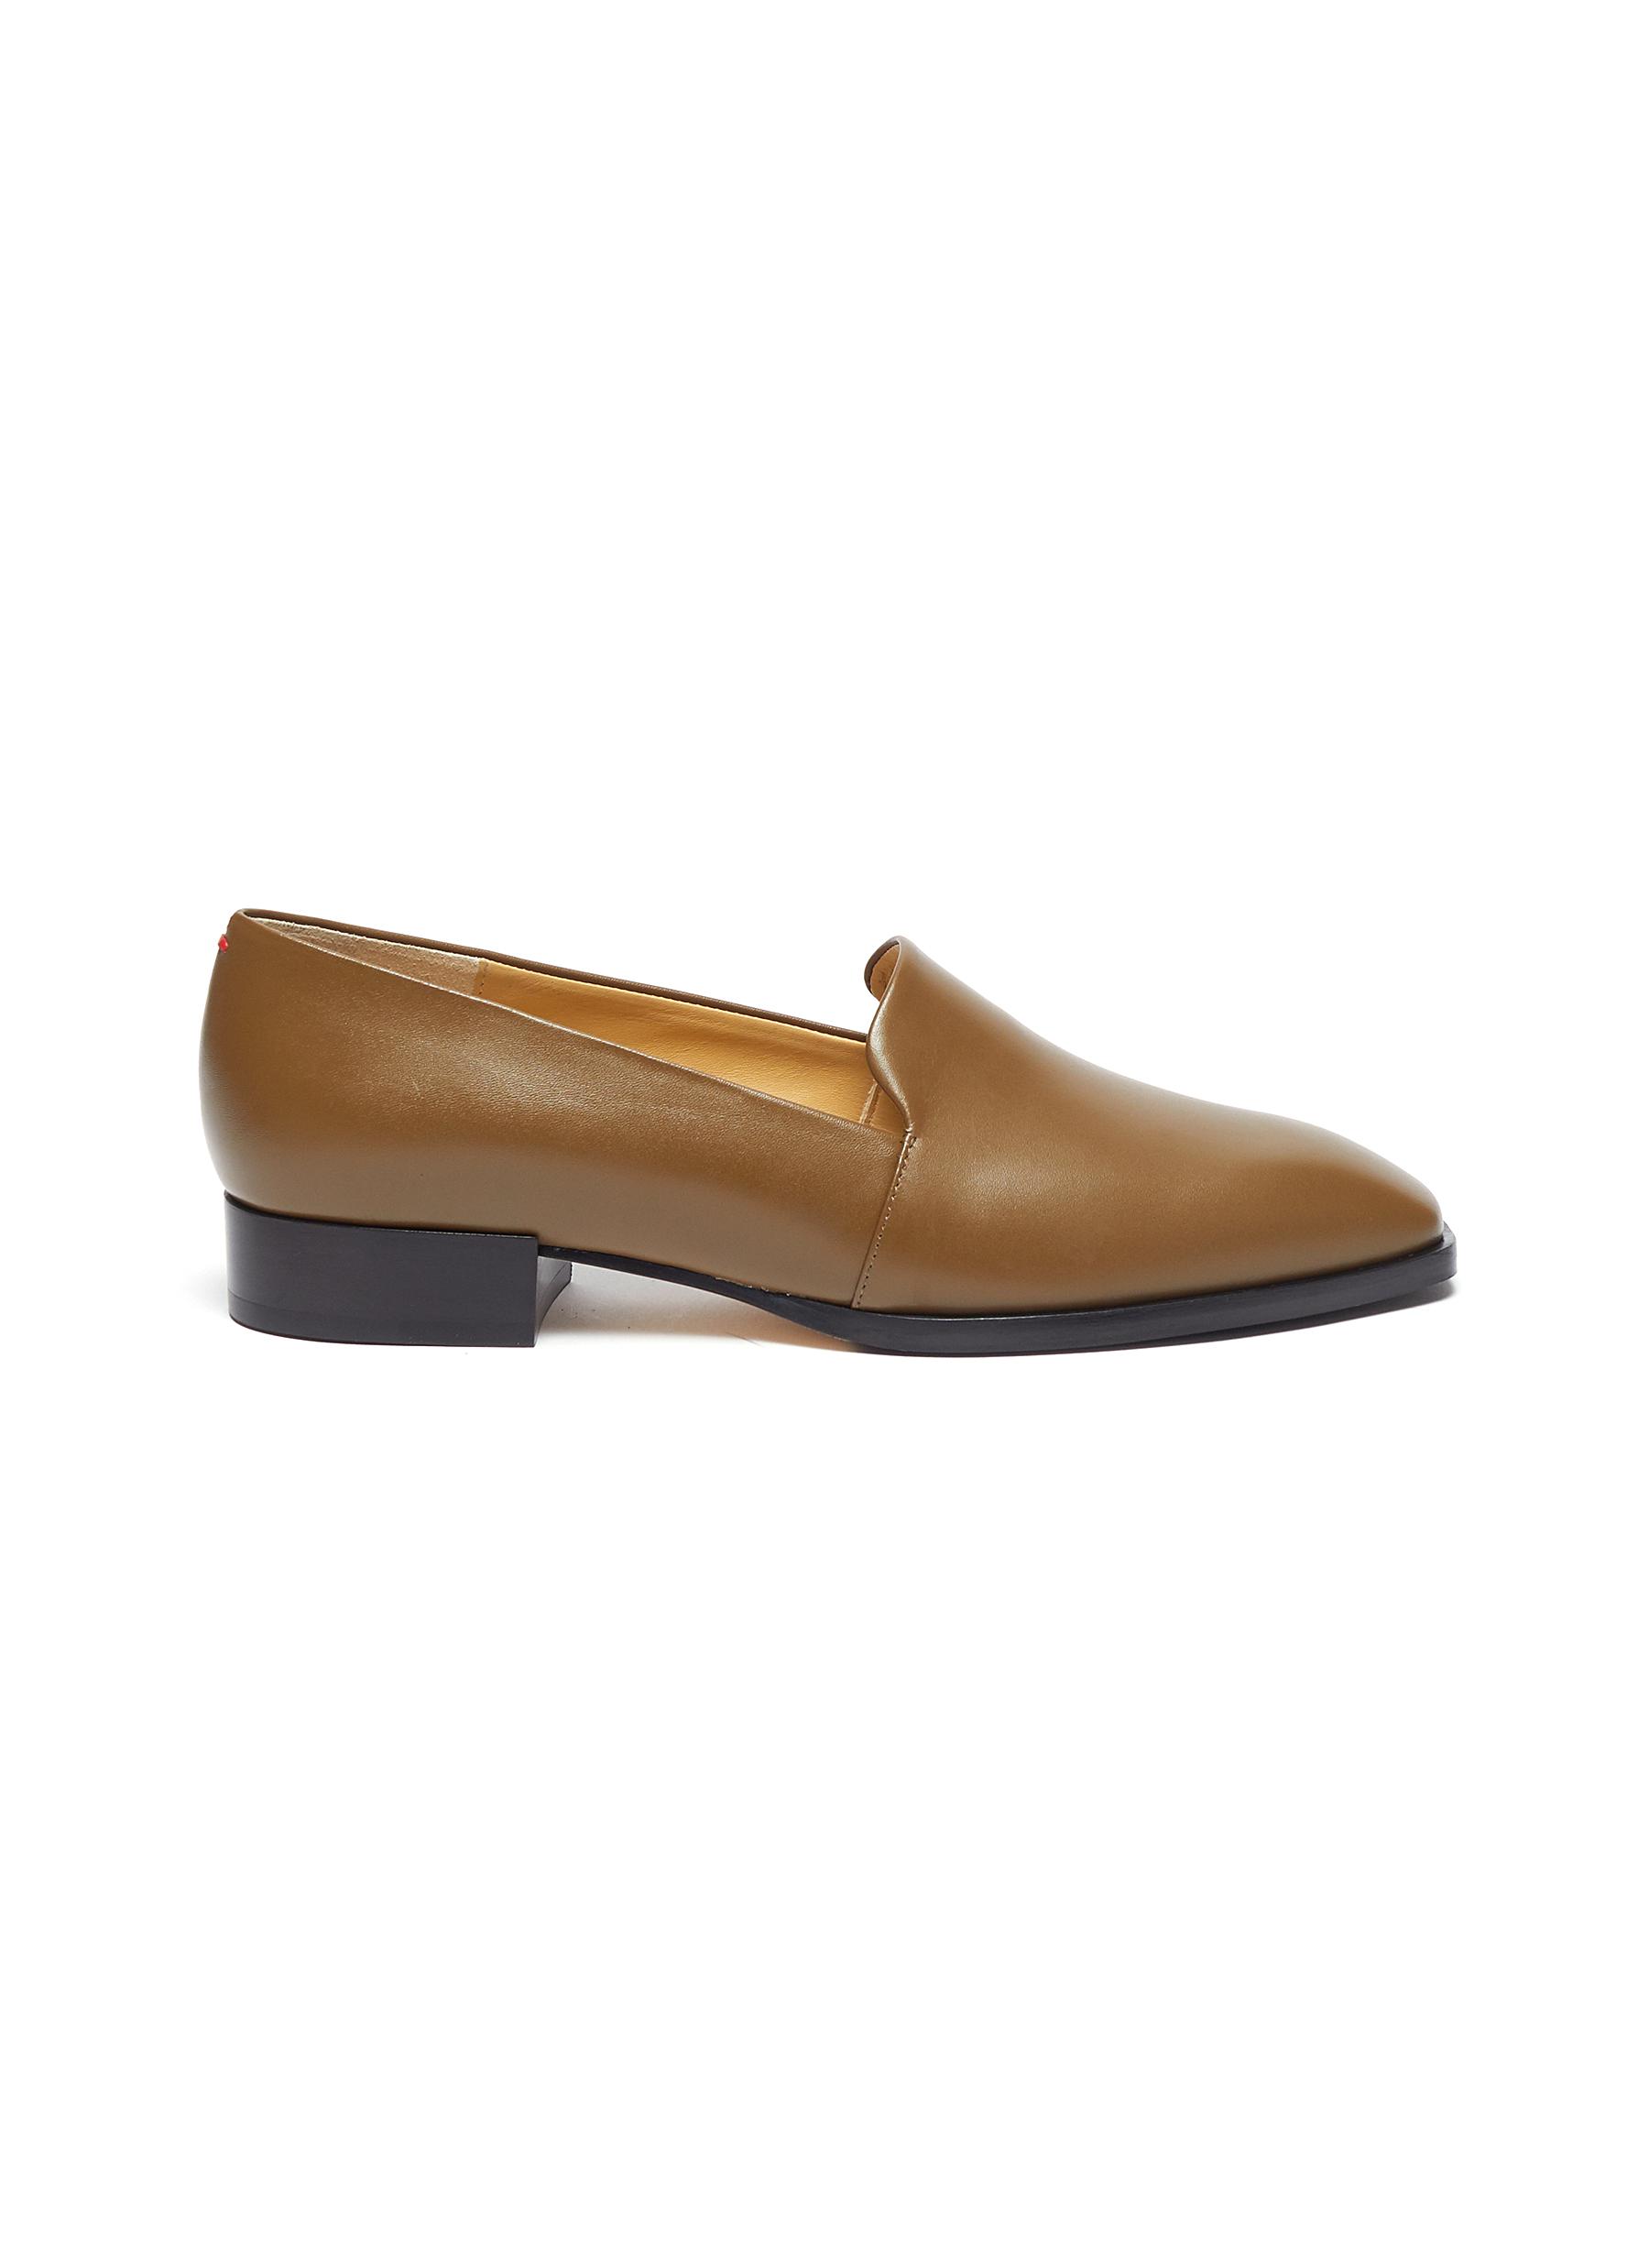 Aeyde 'amber' Block Heel Leather Loafers In Brown